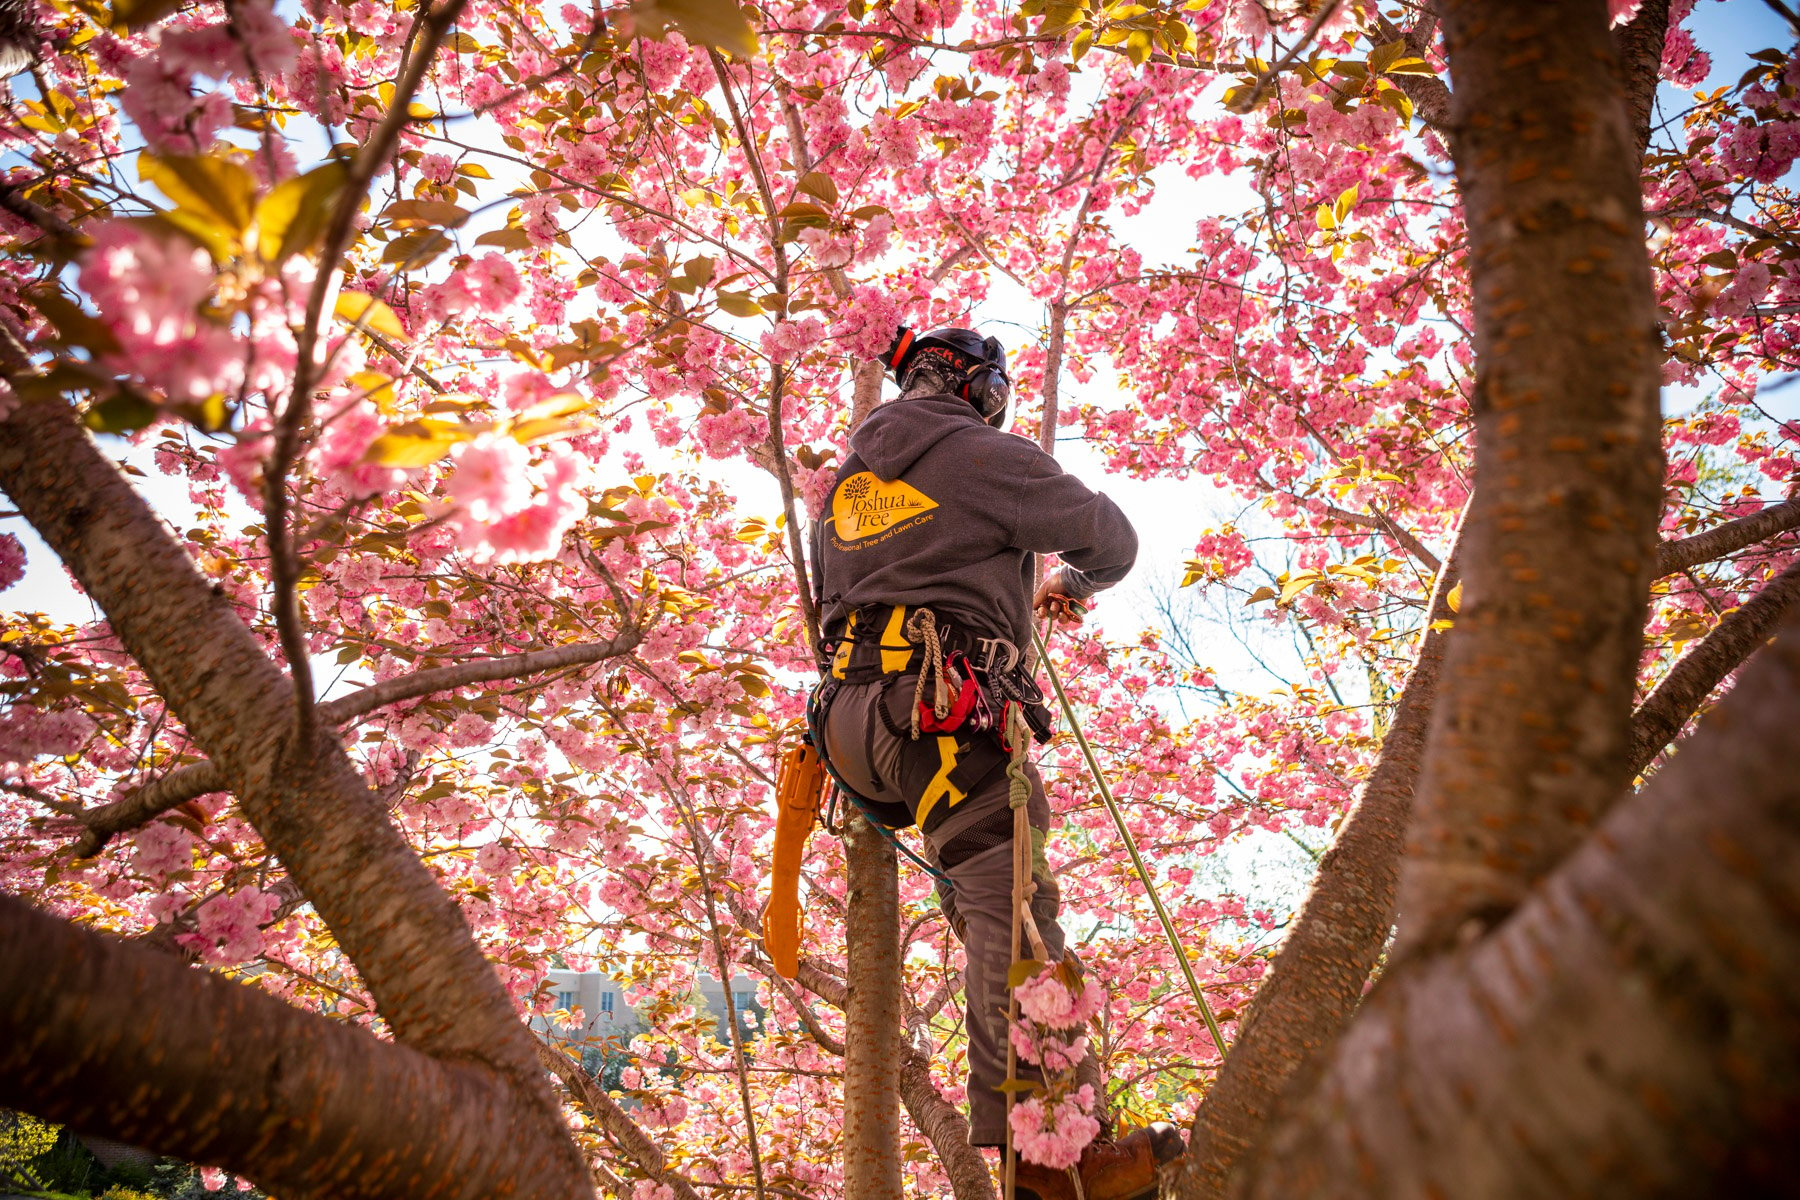 arborist climbing a flowering redbud tree to perform general tree care services